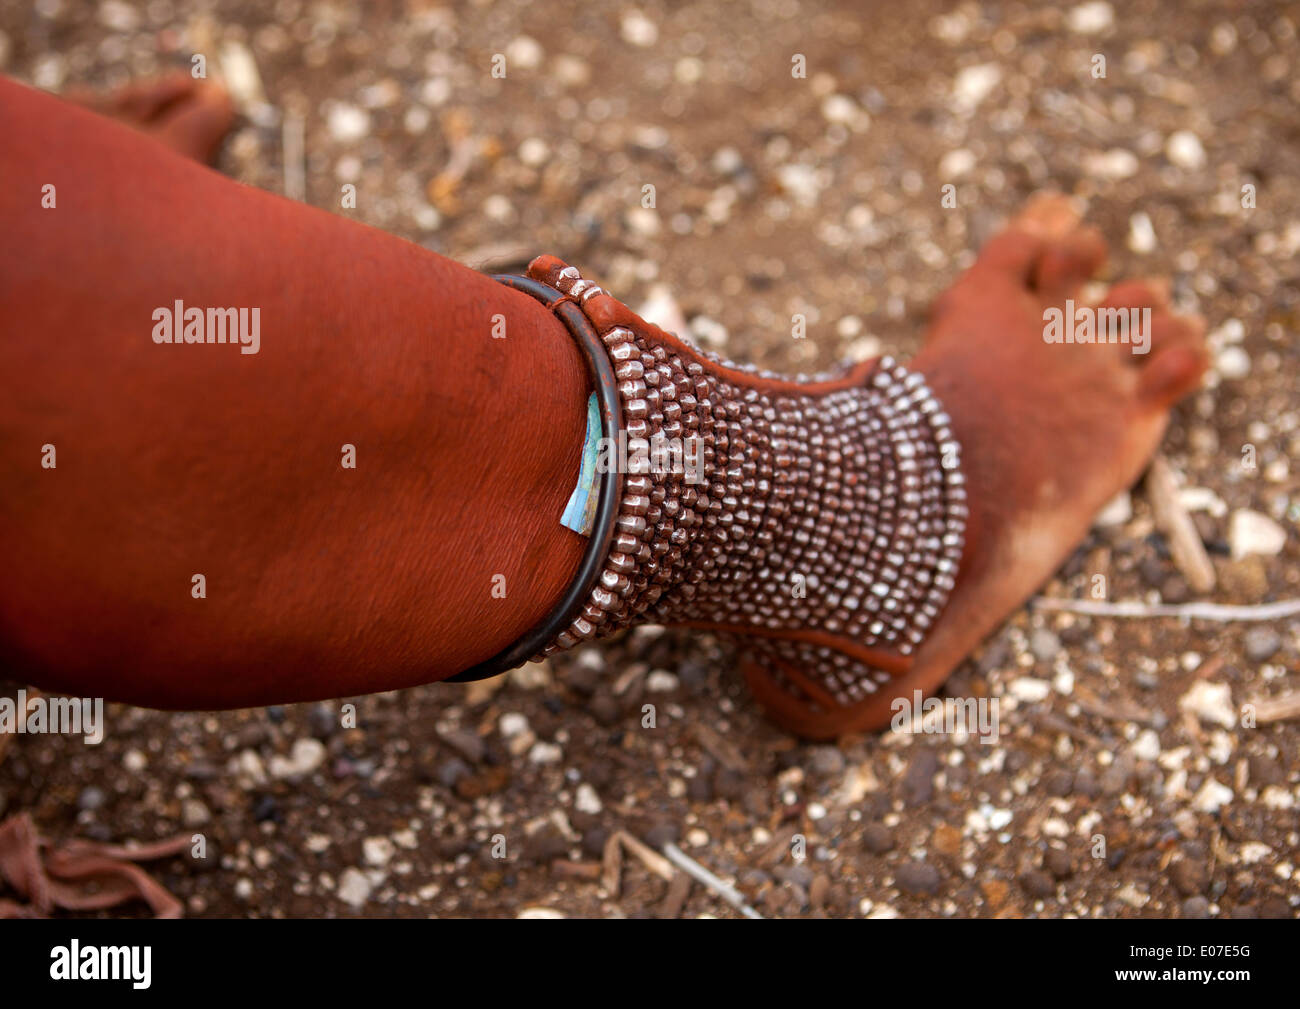 Himba Woman With Beaded Anklets To Protect Their Legs From Venomous Animal Bites, Epupa, Namibia Stock Photo